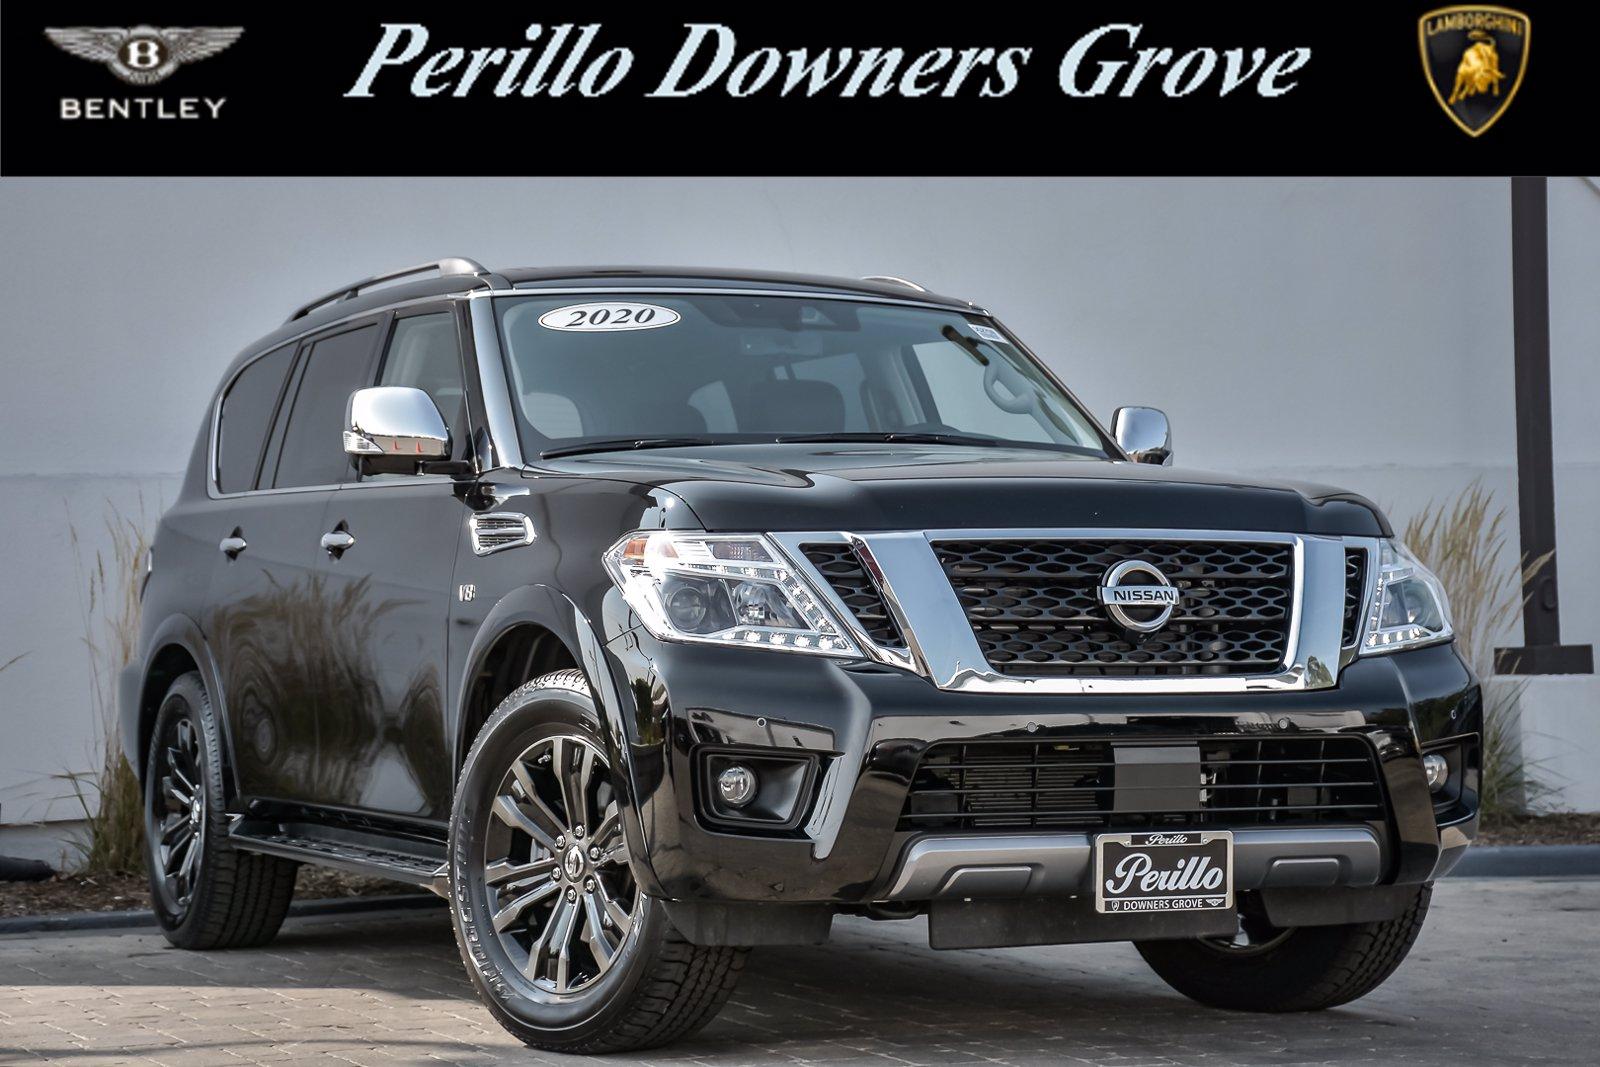 Used 2020 Nissan Armada Platinum, Rear Ent, | Downers Grove, IL